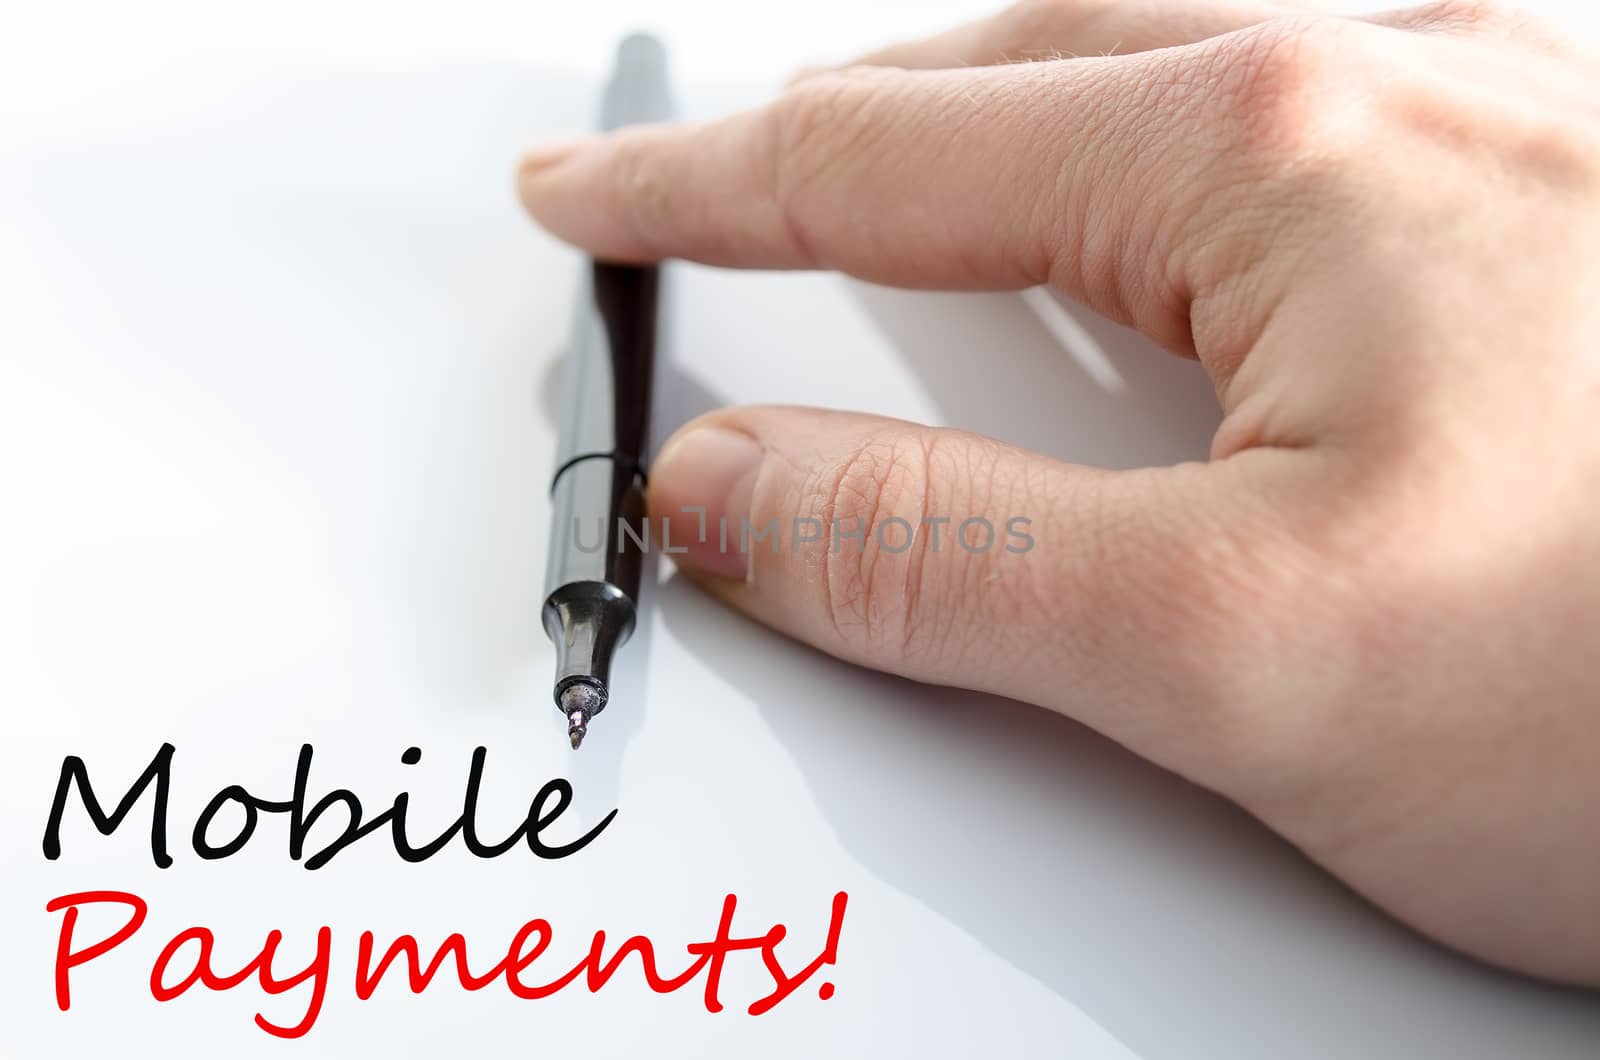 Mobile Payments Concept Isolated Over White Background